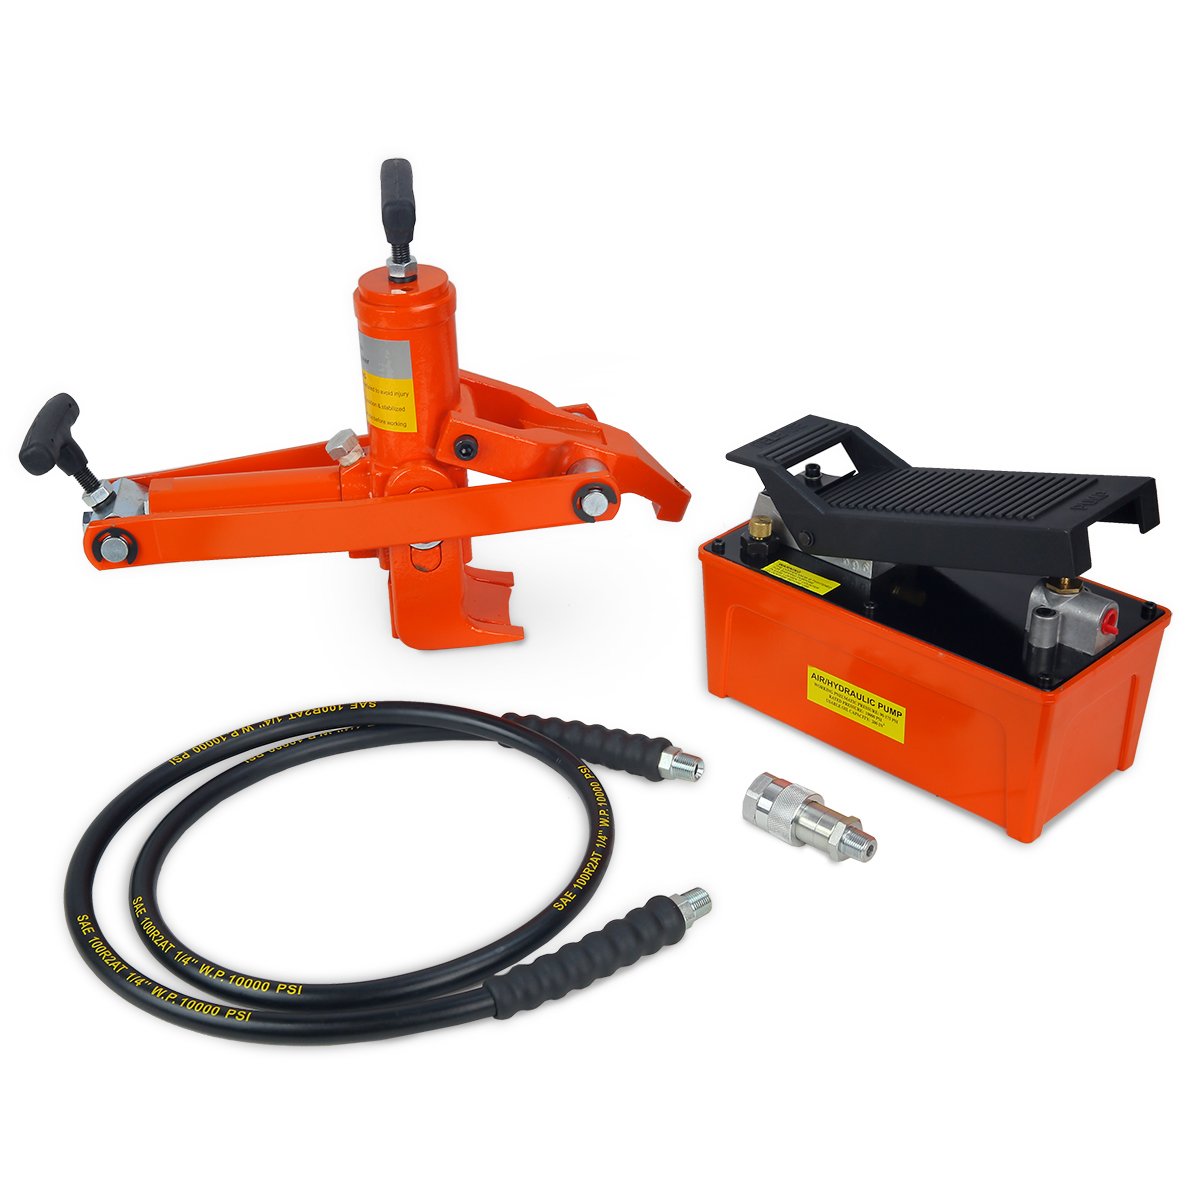 Portable 10000PSI Hydraulic Tire Bead Commercial Breaker Changer Auto Tools